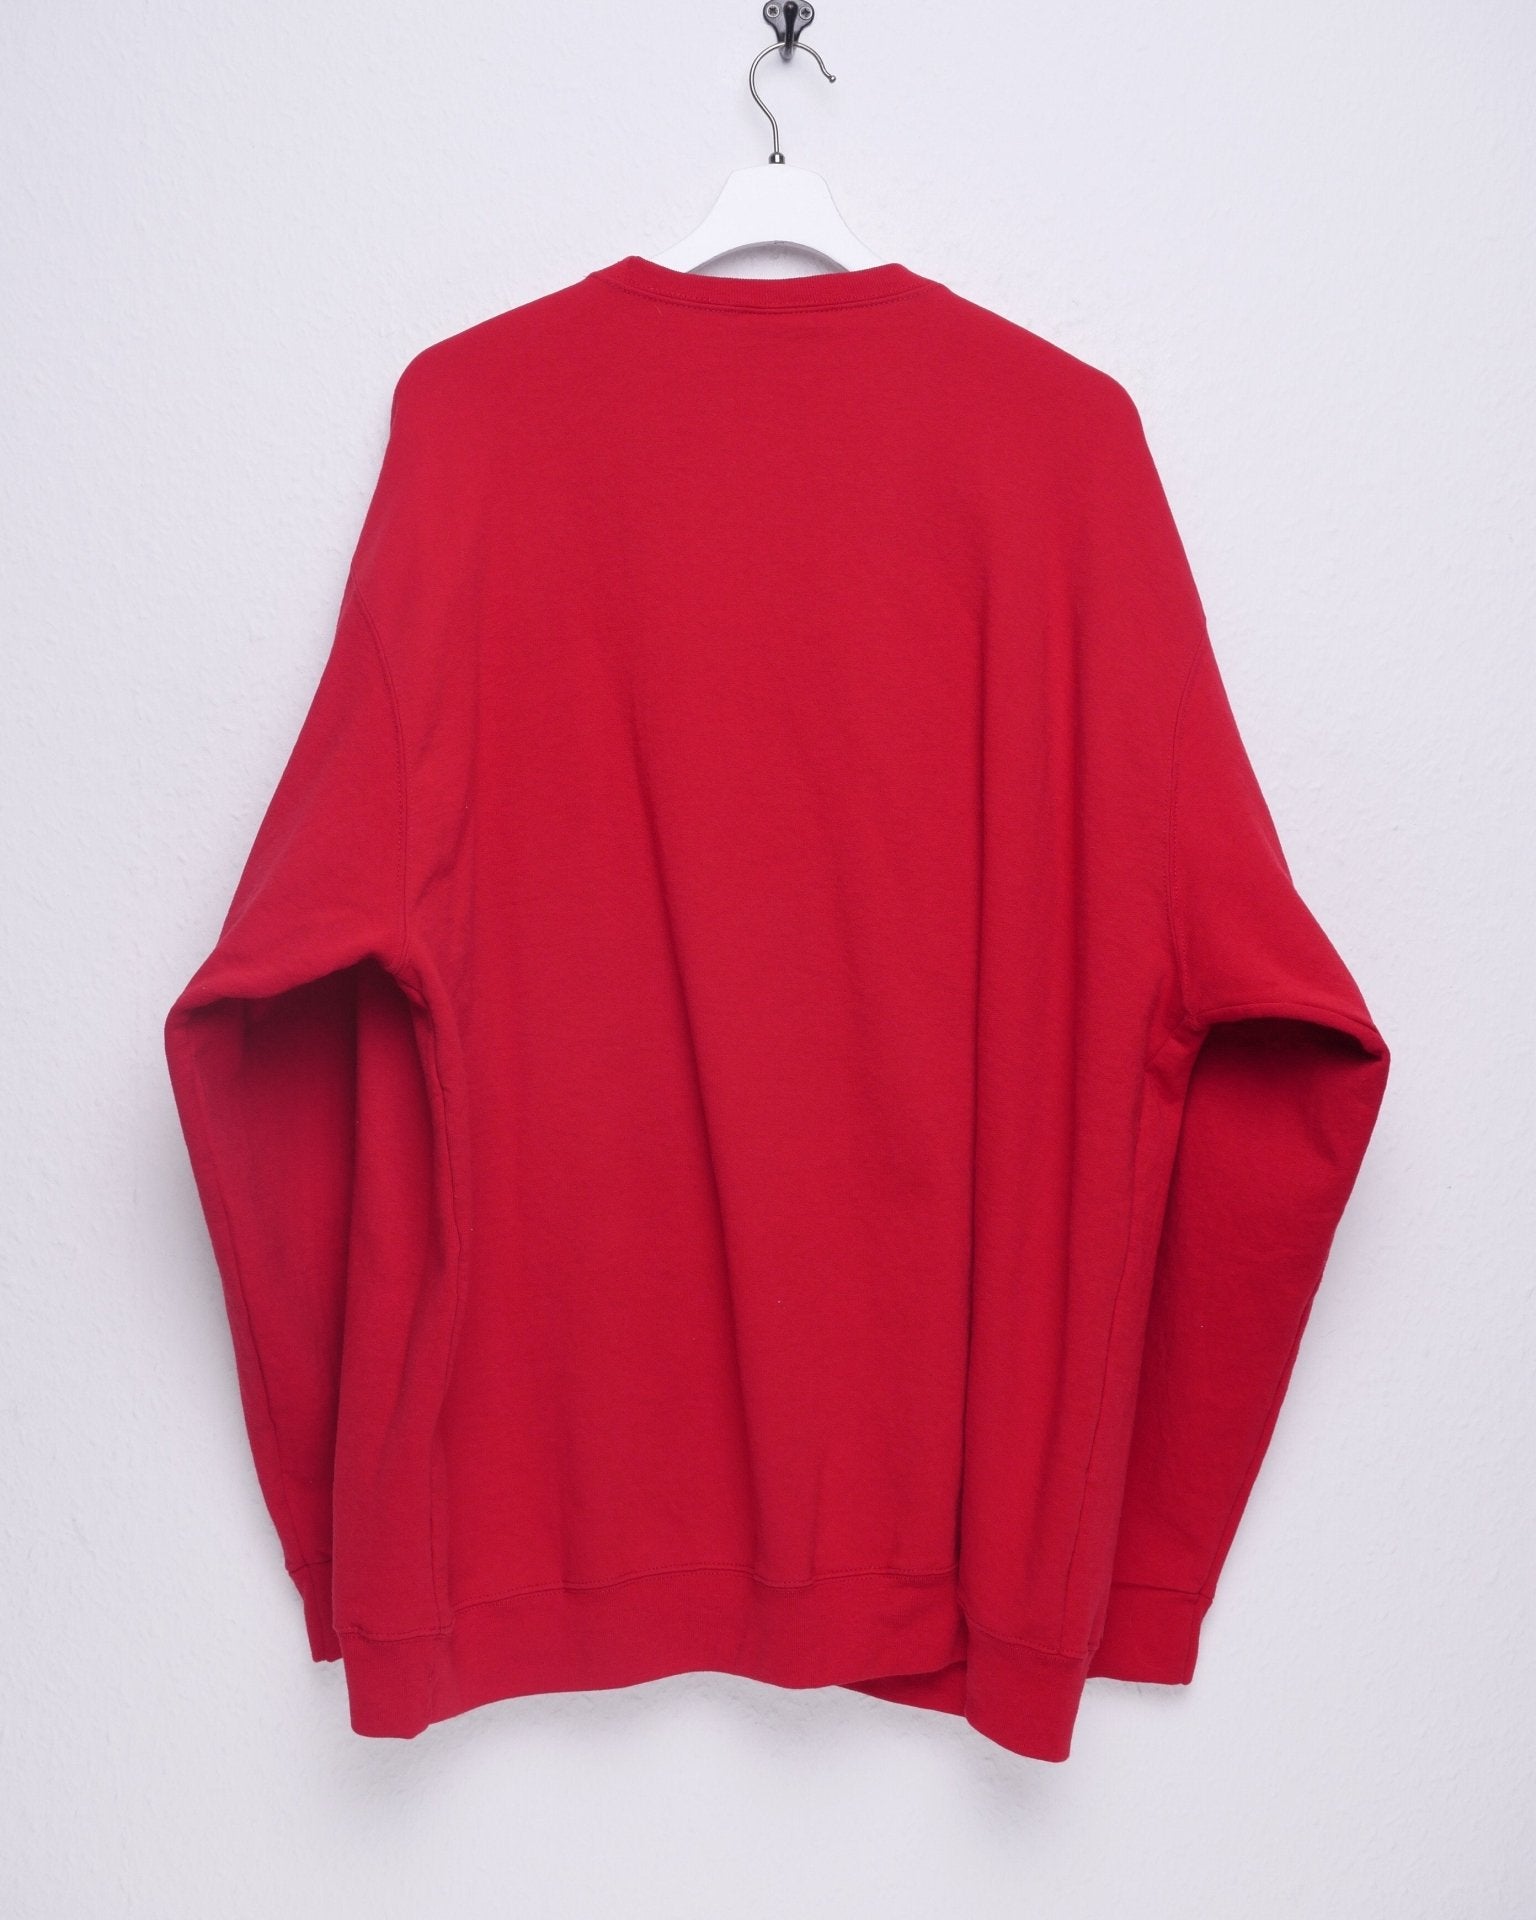 nfl red Basic Sweater - Peeces